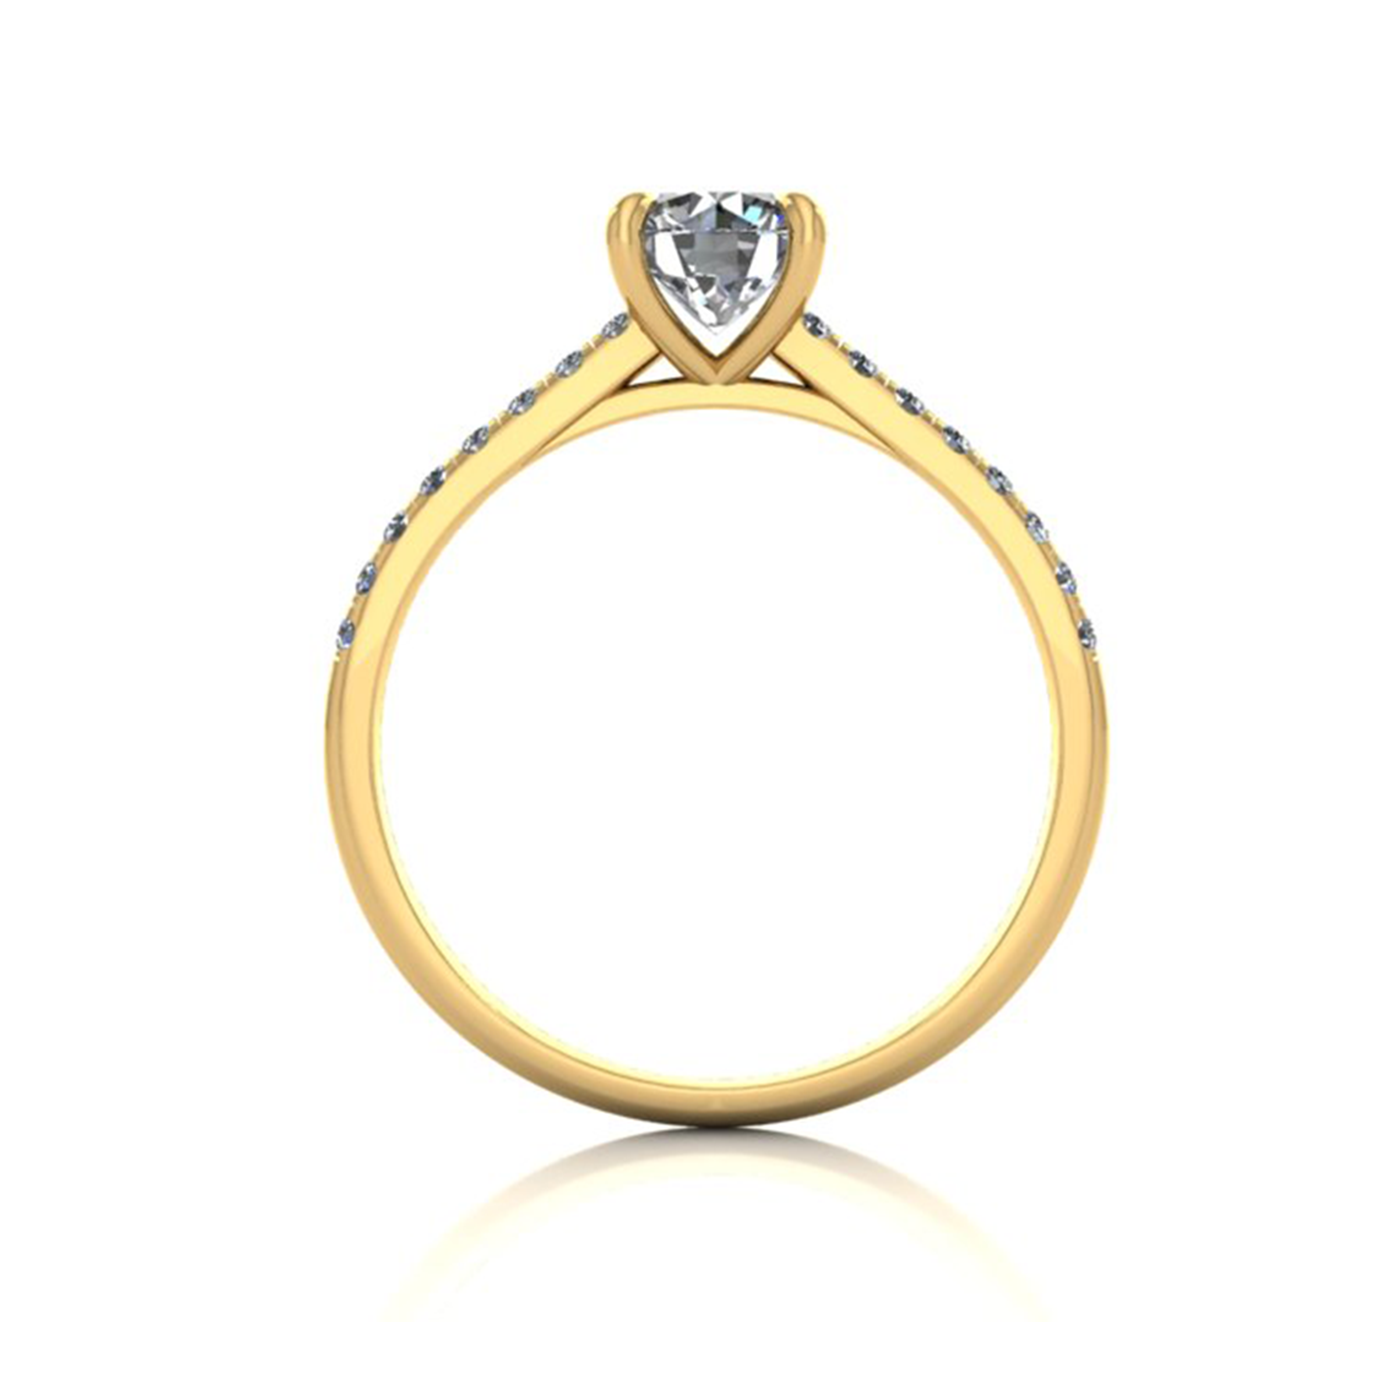 18k yellow gold 0,80 ct 4 prongs round cut diamond engagement ring with whisper thin pavÉ set band